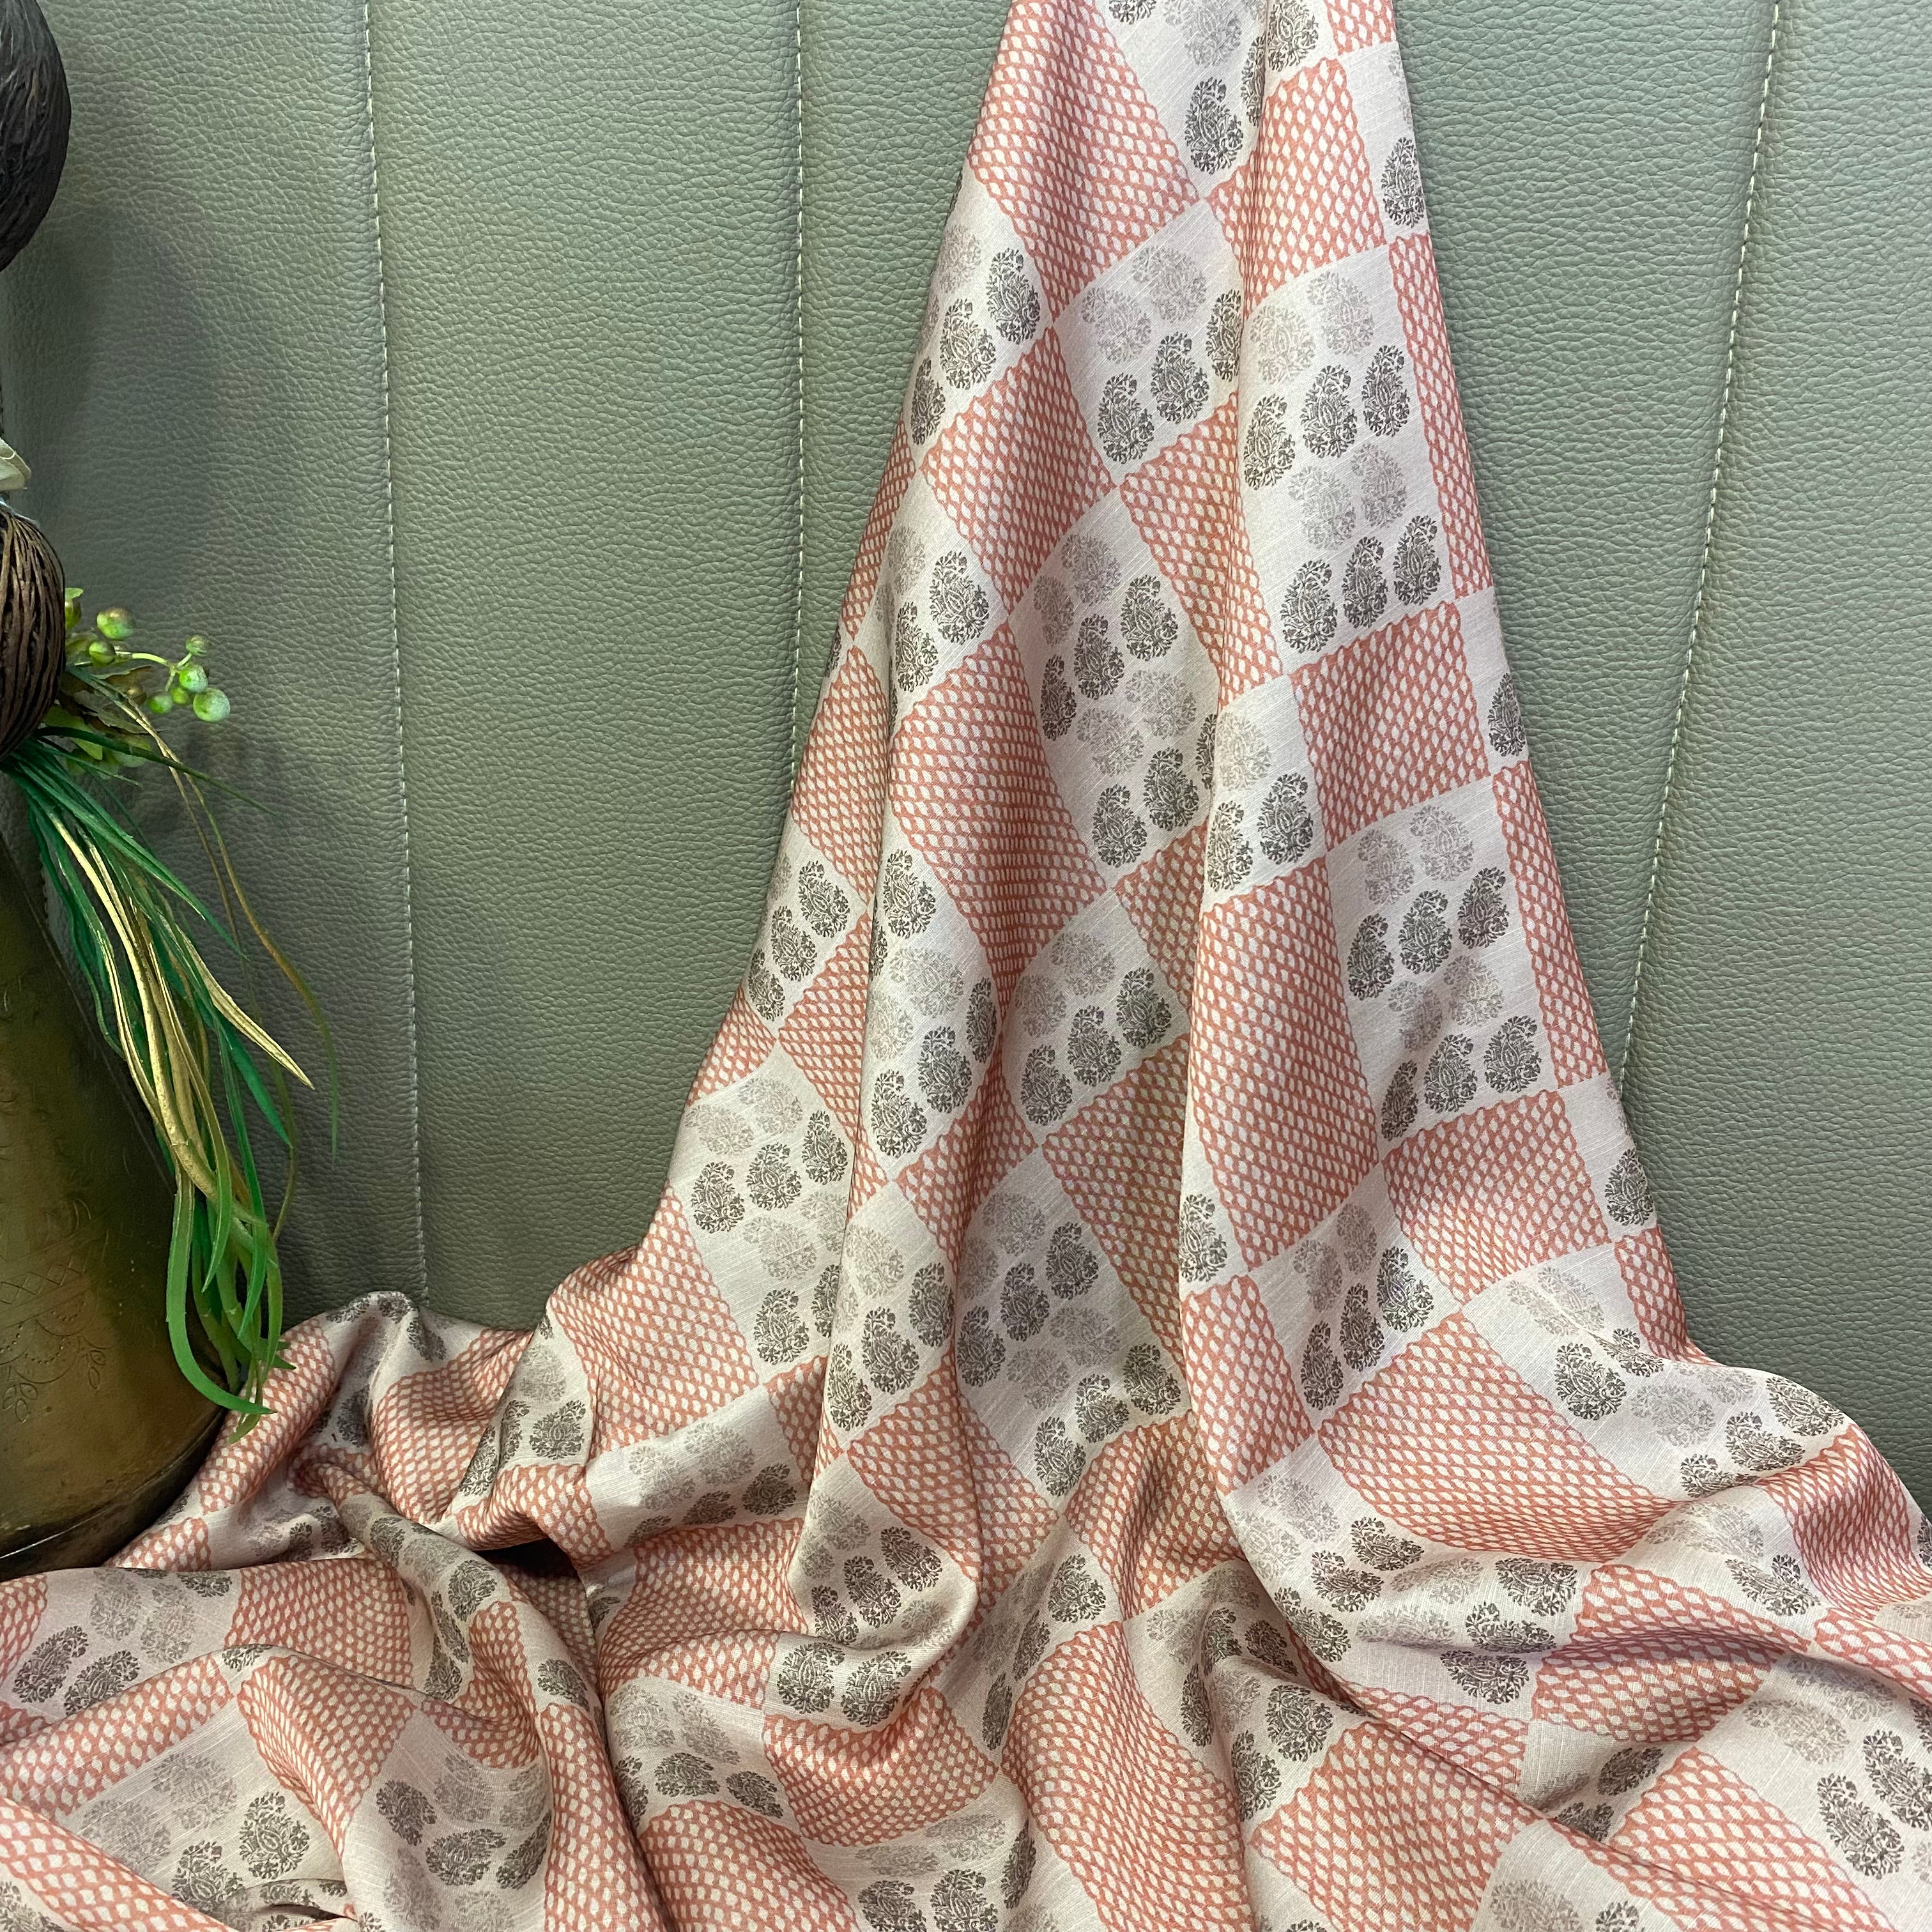 Linen Satin Mix-Match Set in Dusty Pink Abstract print, per meter price